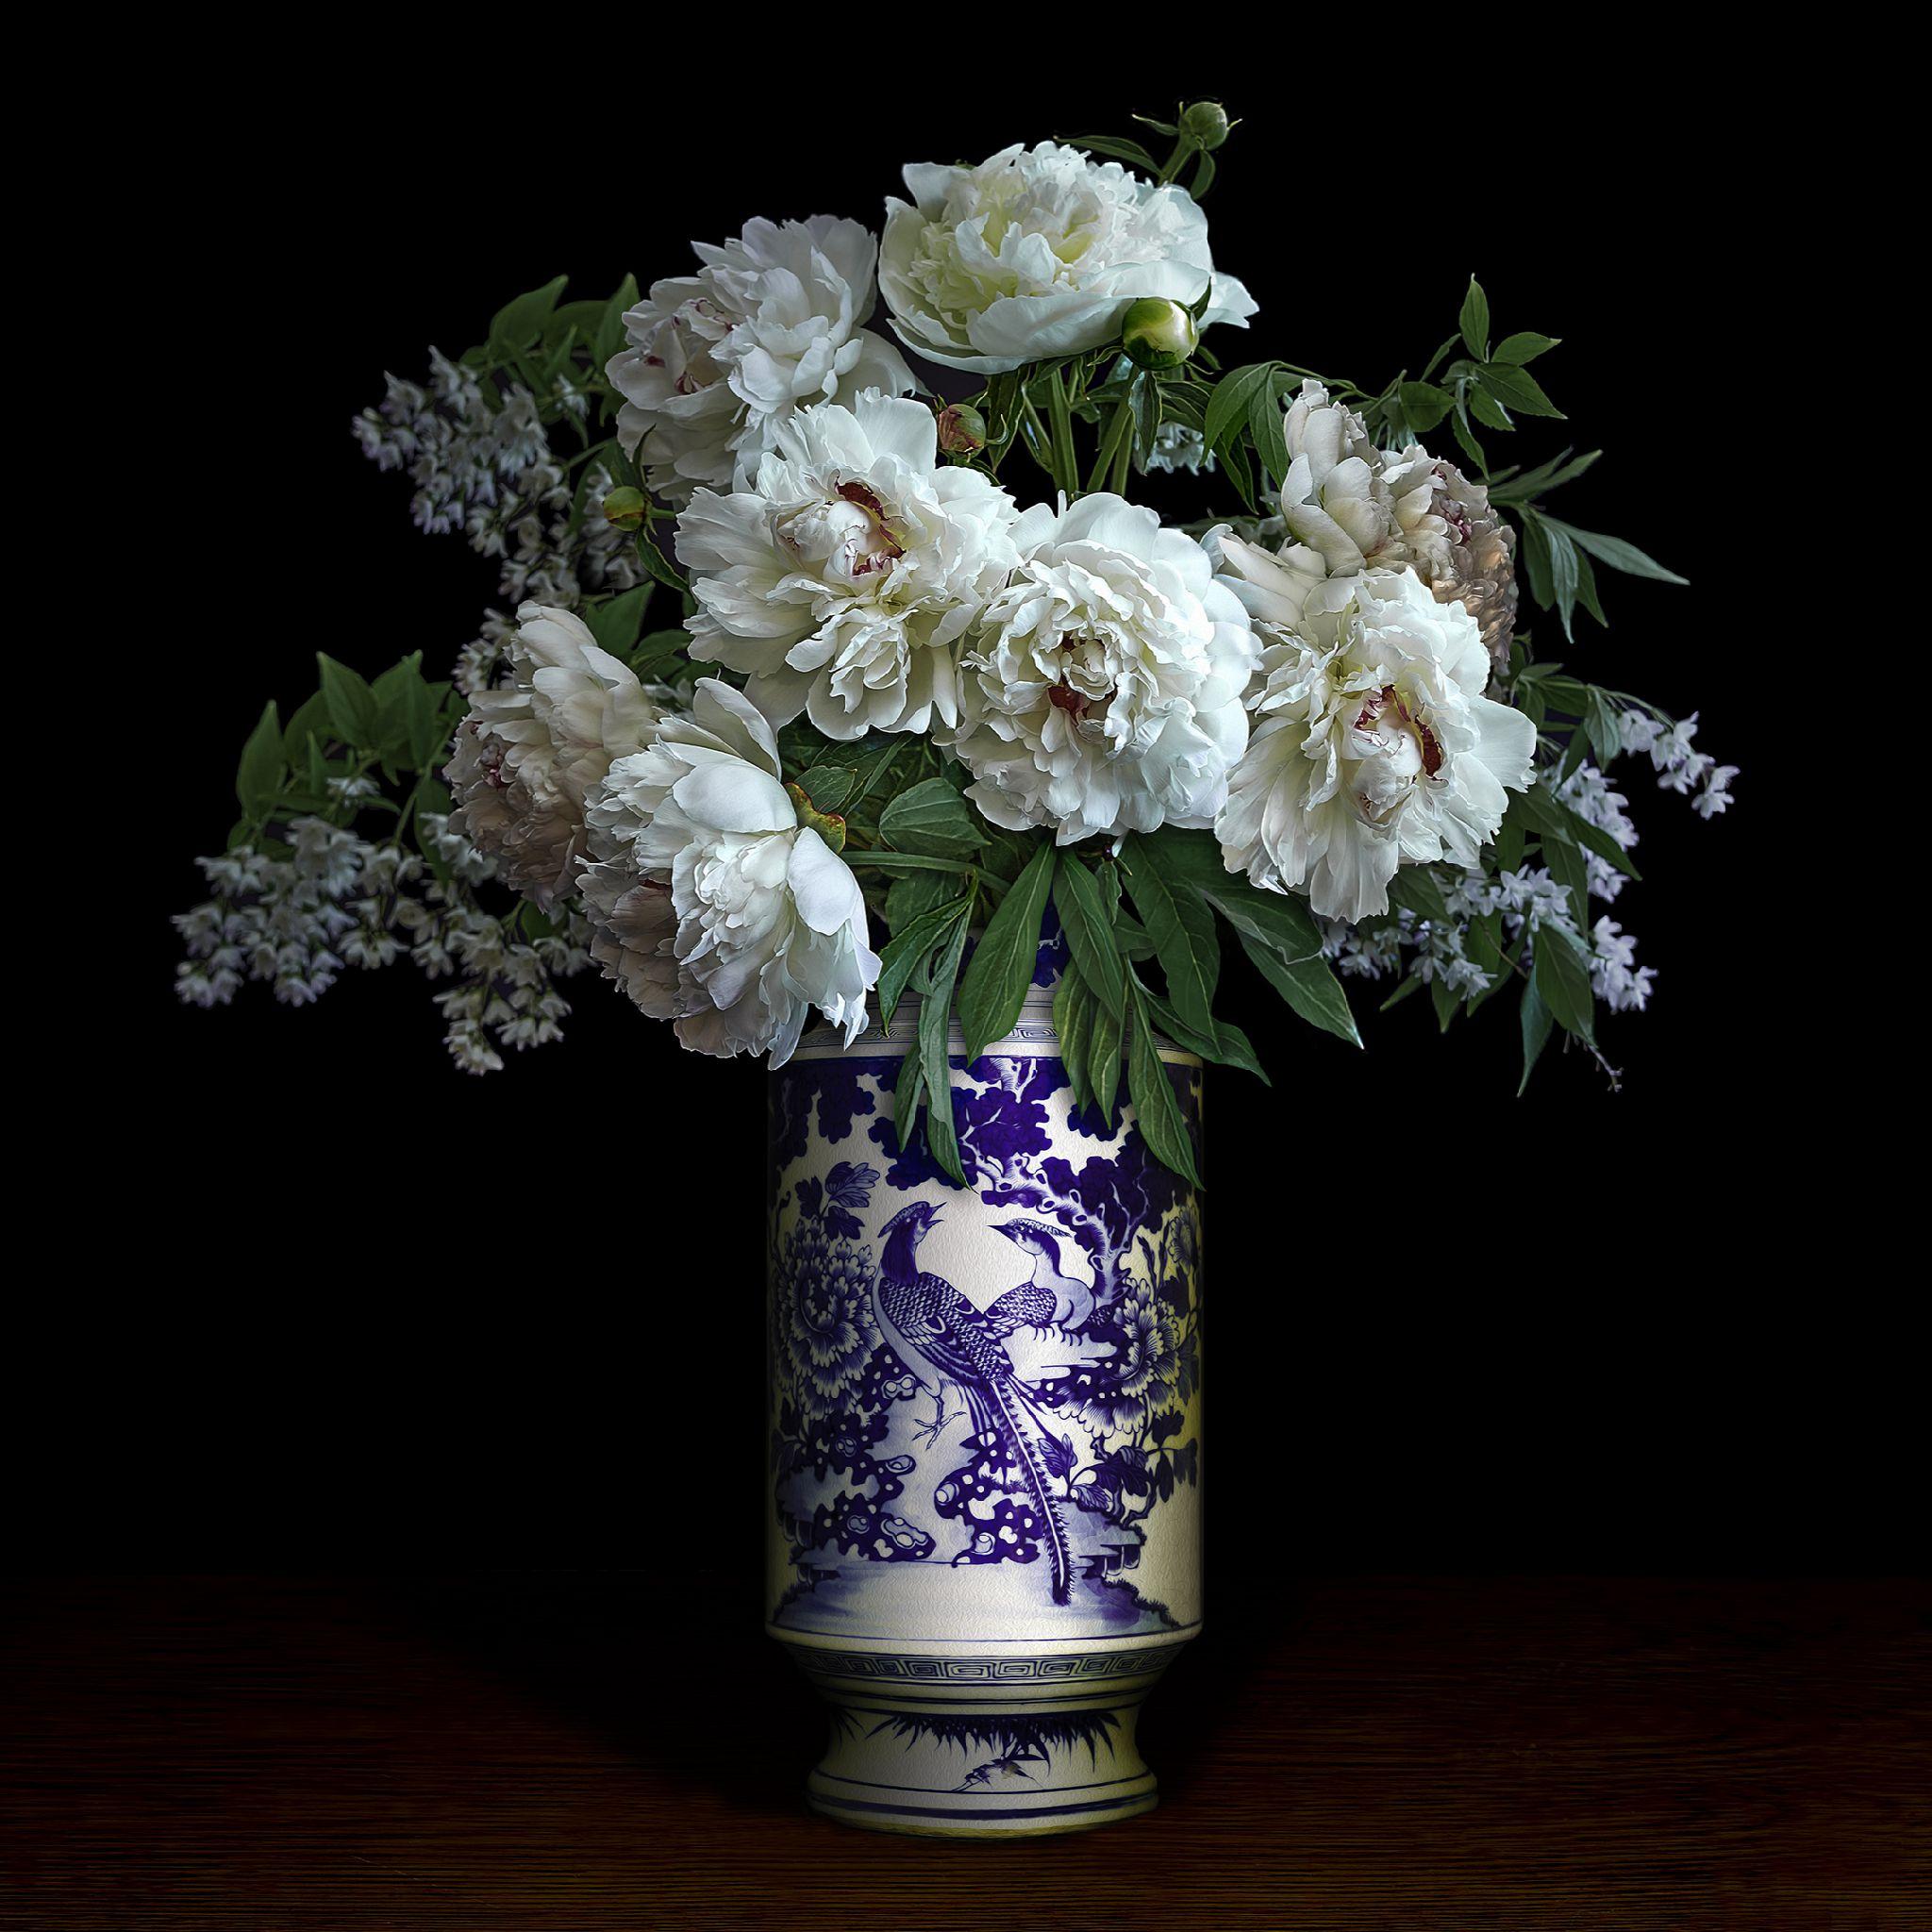 Peonies in a Blue and White Chinese Peacock Vase - Photograph by T.M. Glass